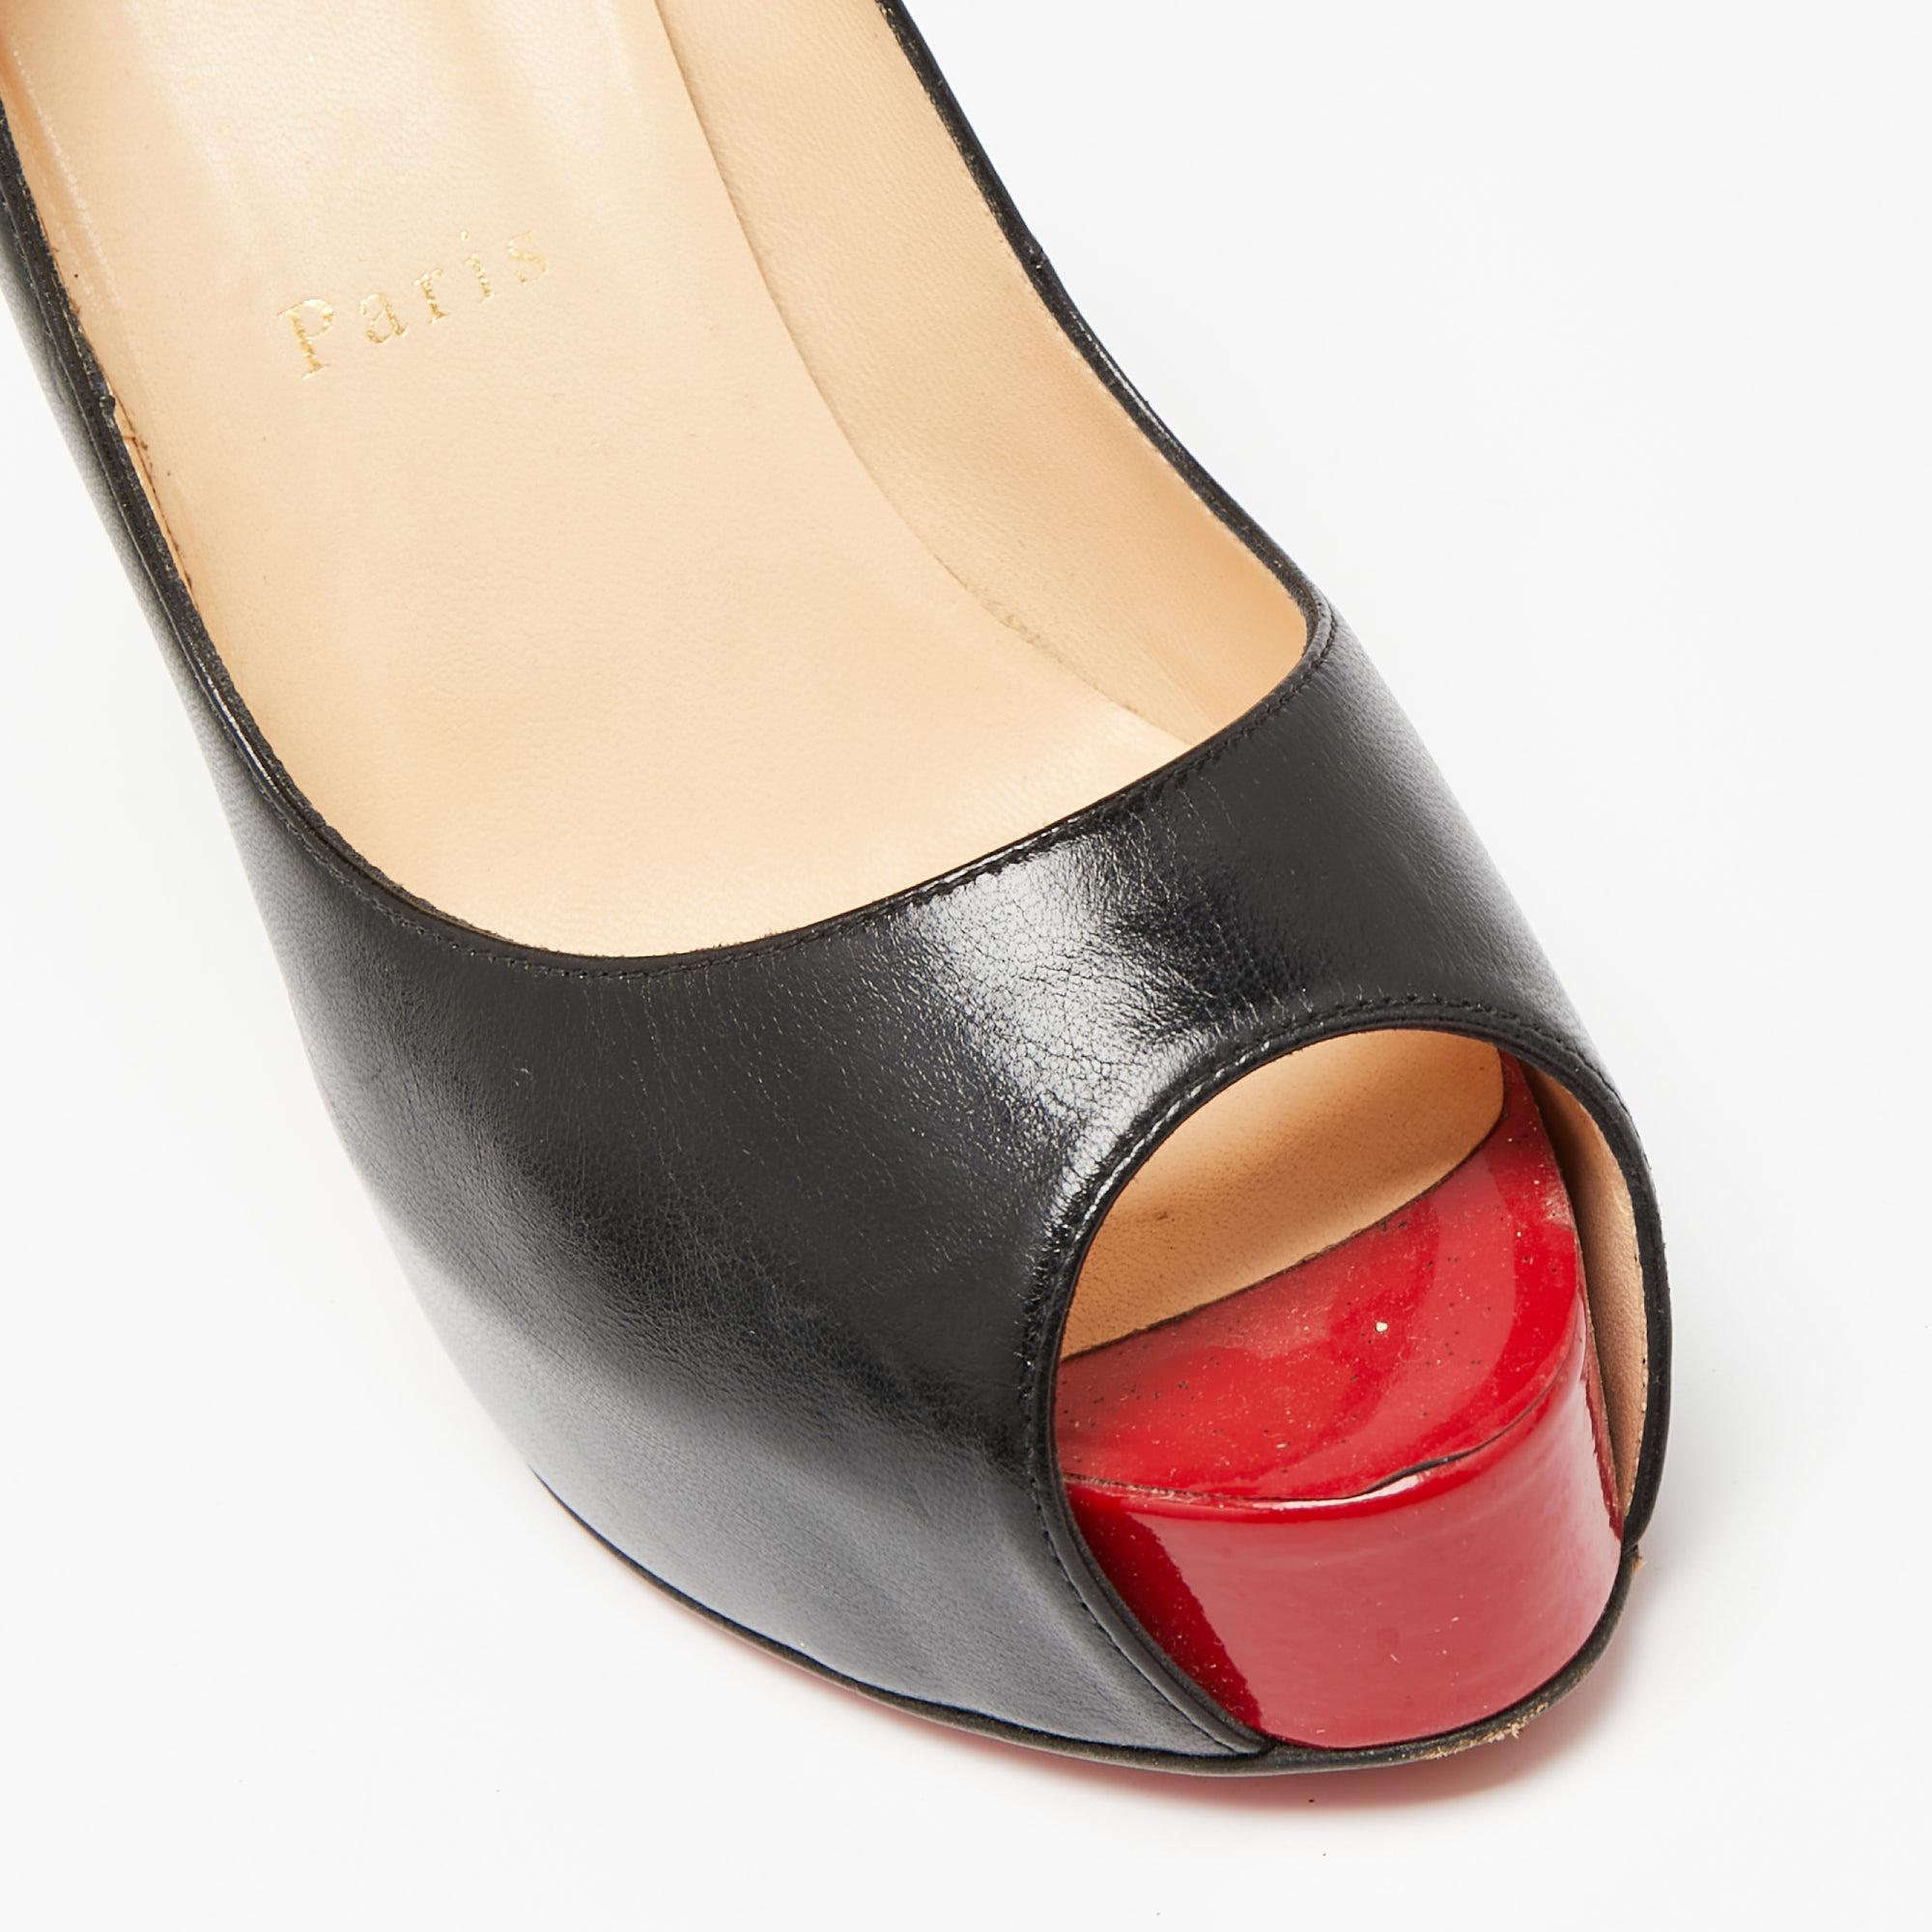 Christian Louboutin Black Leather Very Prive Peep-Toe Pumps Size 37 For Sale 4